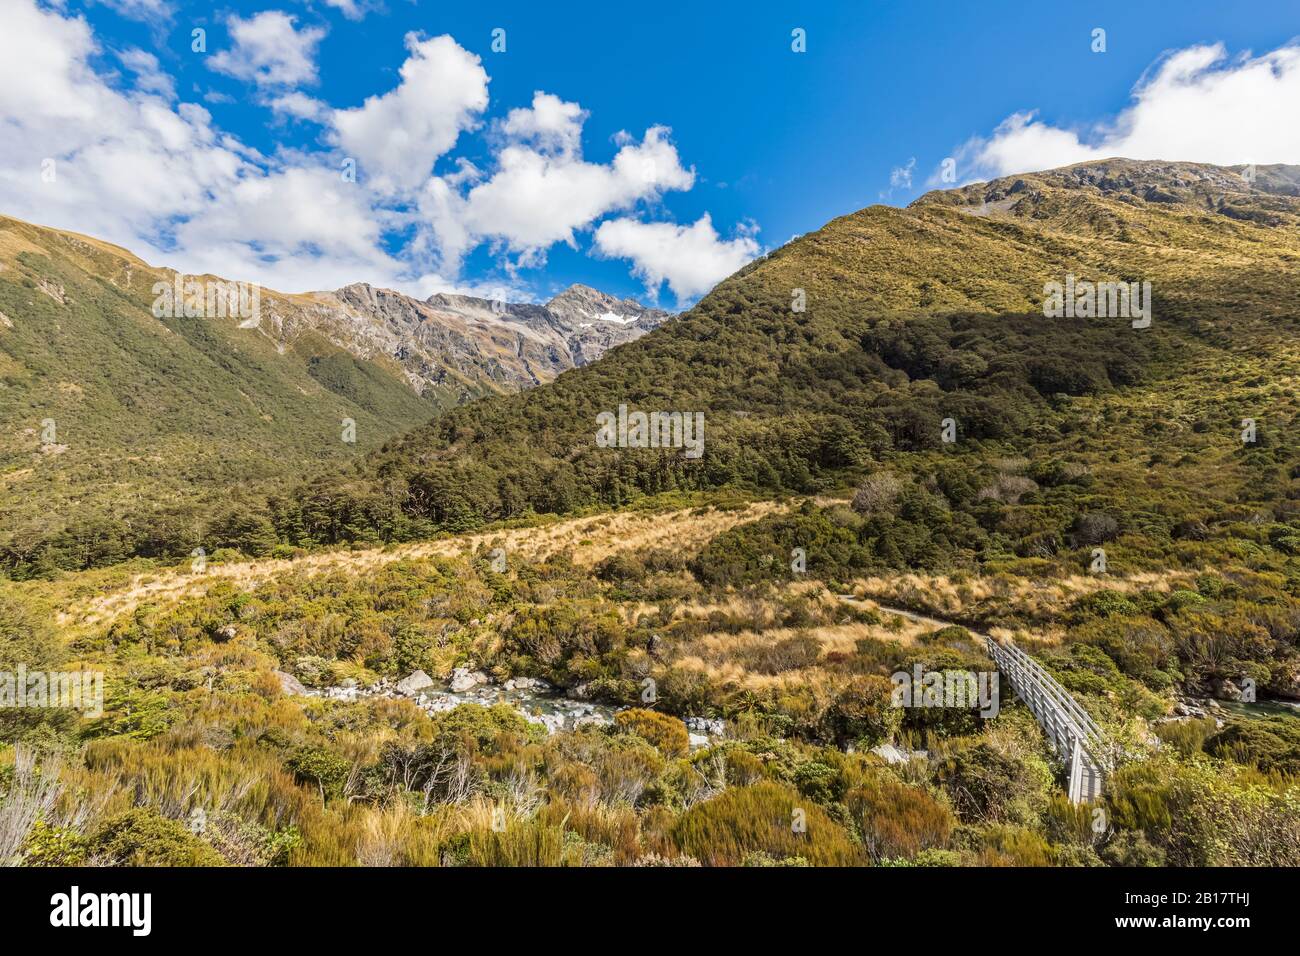 Neuseeland, Selwyn District, Arthurs Pass, Green forested Mountain Valley Stockfoto